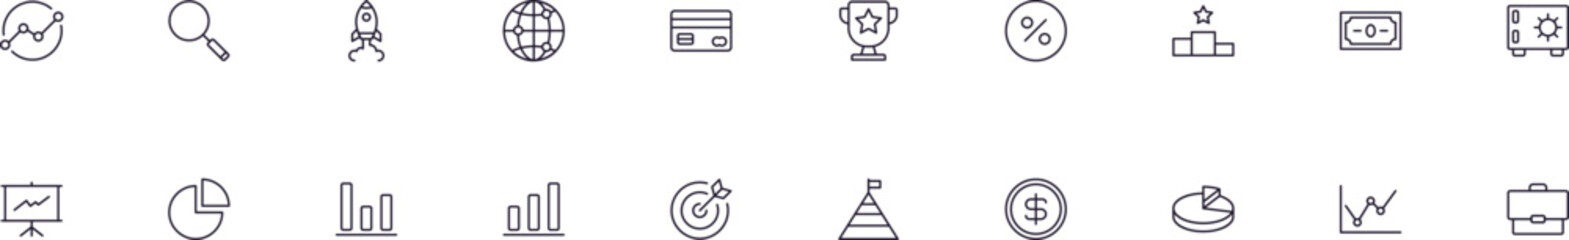 Collection of simple outline illustrations of business, finance, money, progress. Modern line icons for apps, web sites, shops, stores